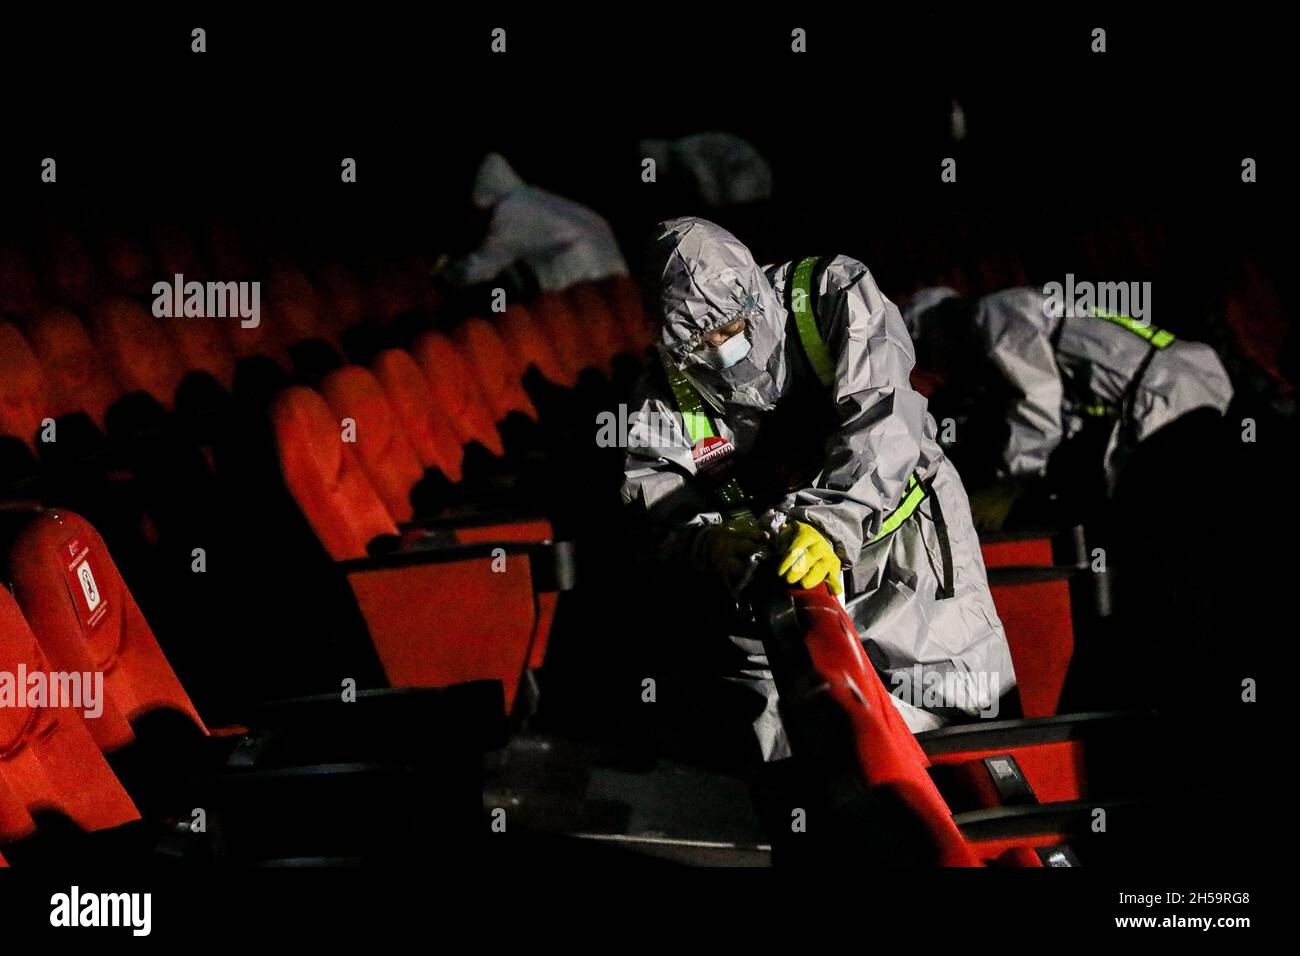 Workers wearing a protective kit sprays disinfectant to sanitize a movie theater as malls prepare to reopen at Robinsons Galleria mall in Quezon City, Metro Manila, Philippines. Stock Photo